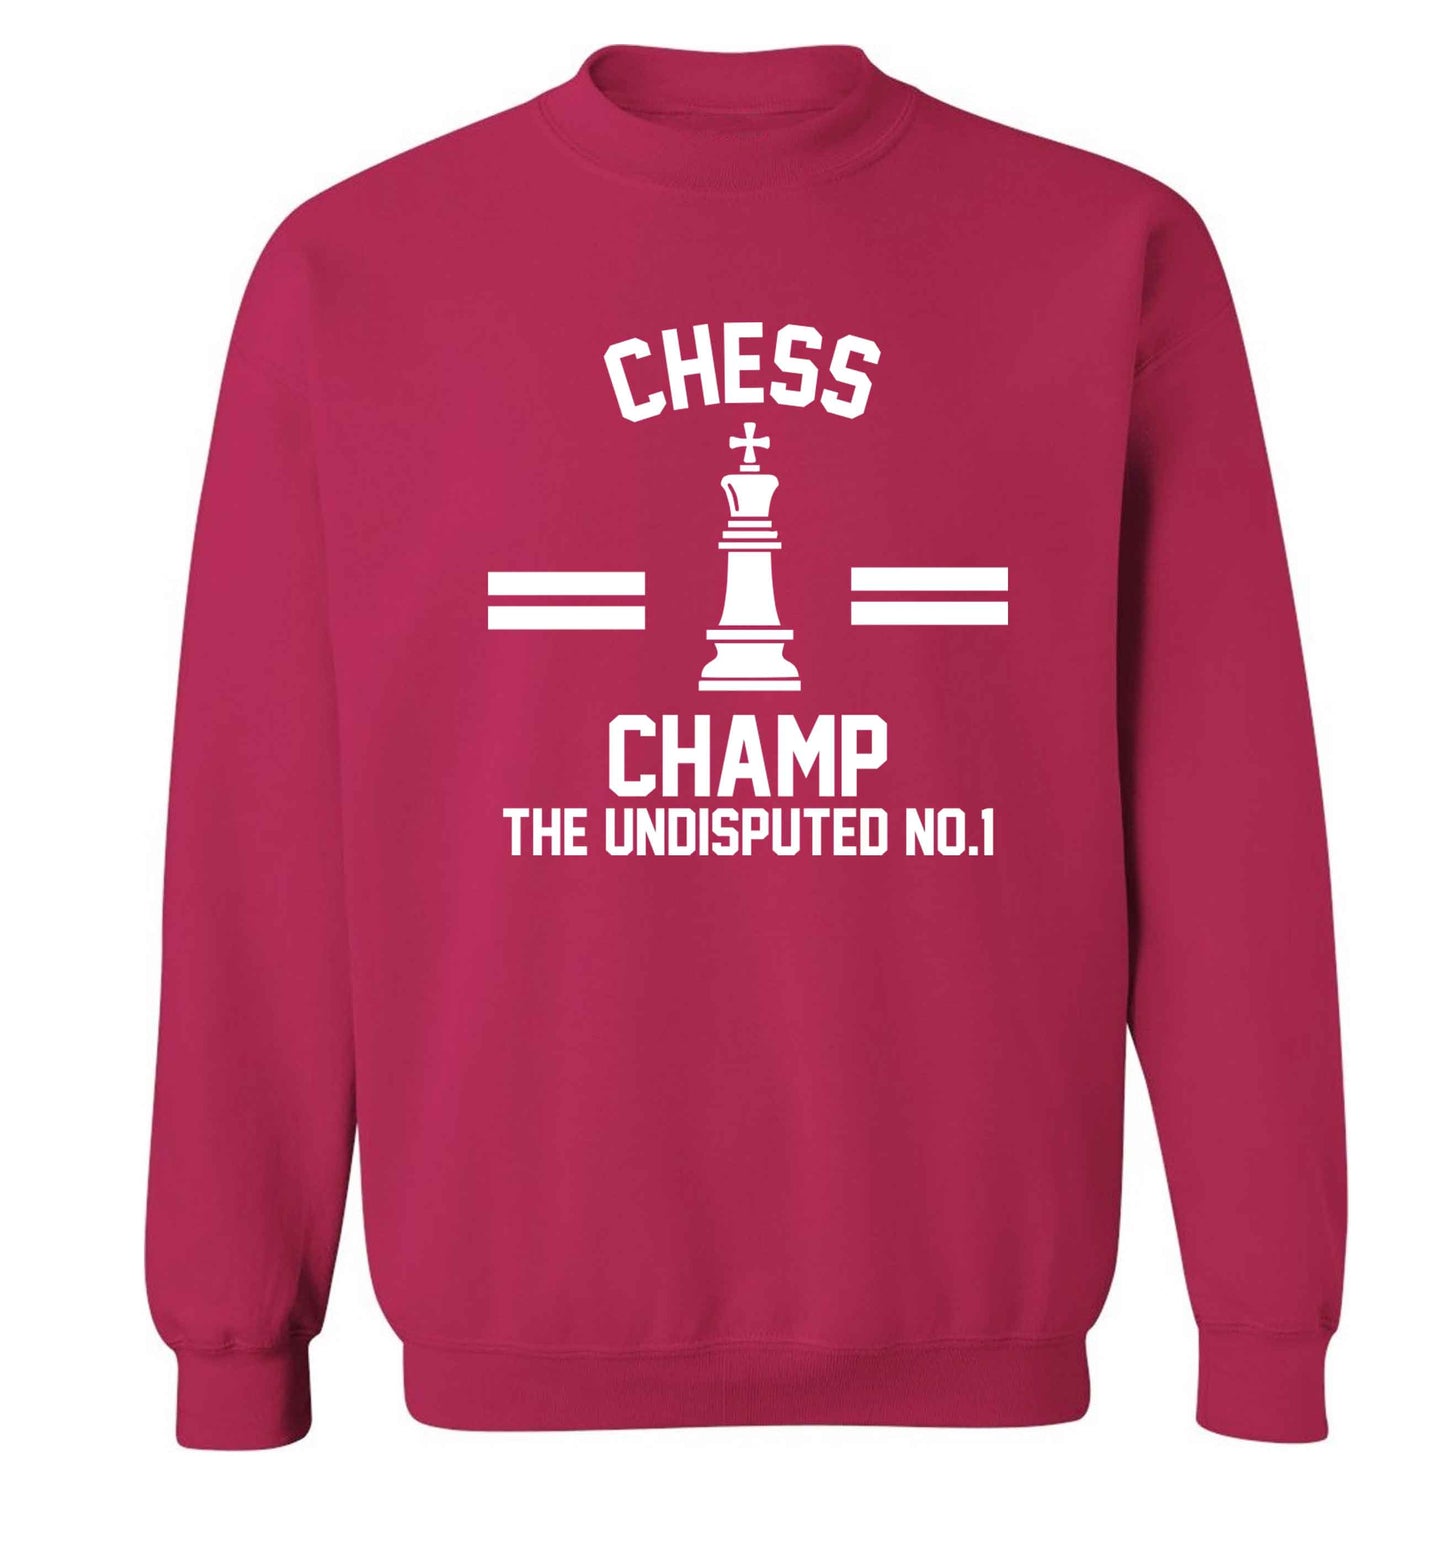 Undisputed chess championship no.1  Adult's unisex pink Sweater 2XL